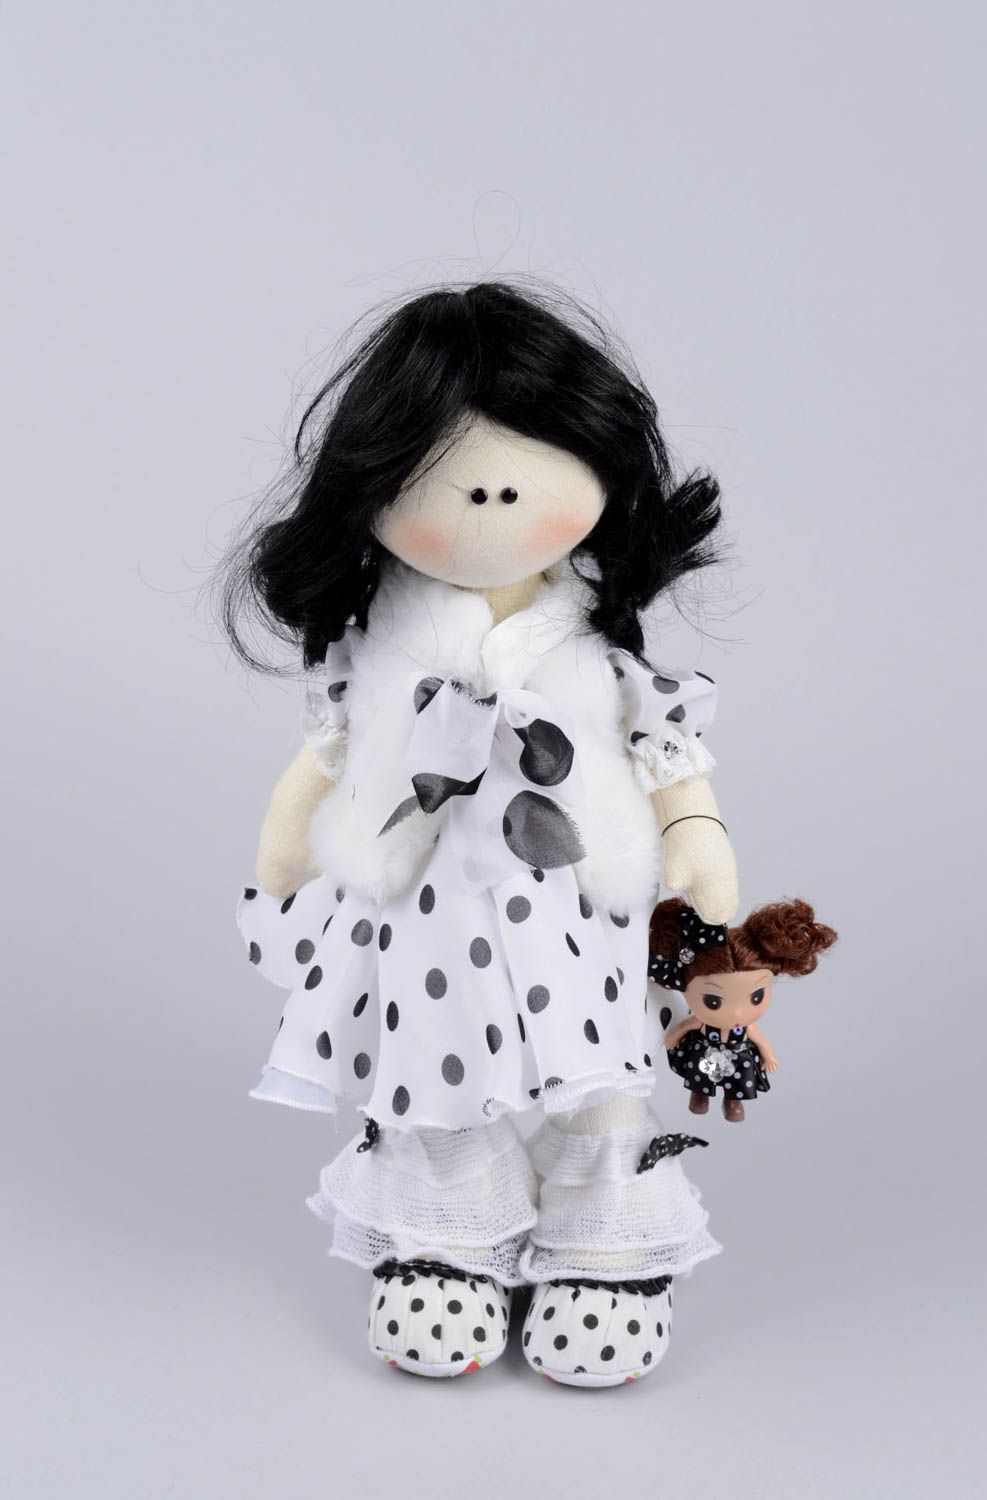 Handmade soft toy collectible doll girl doll homemade home decor gifts for her photo 1